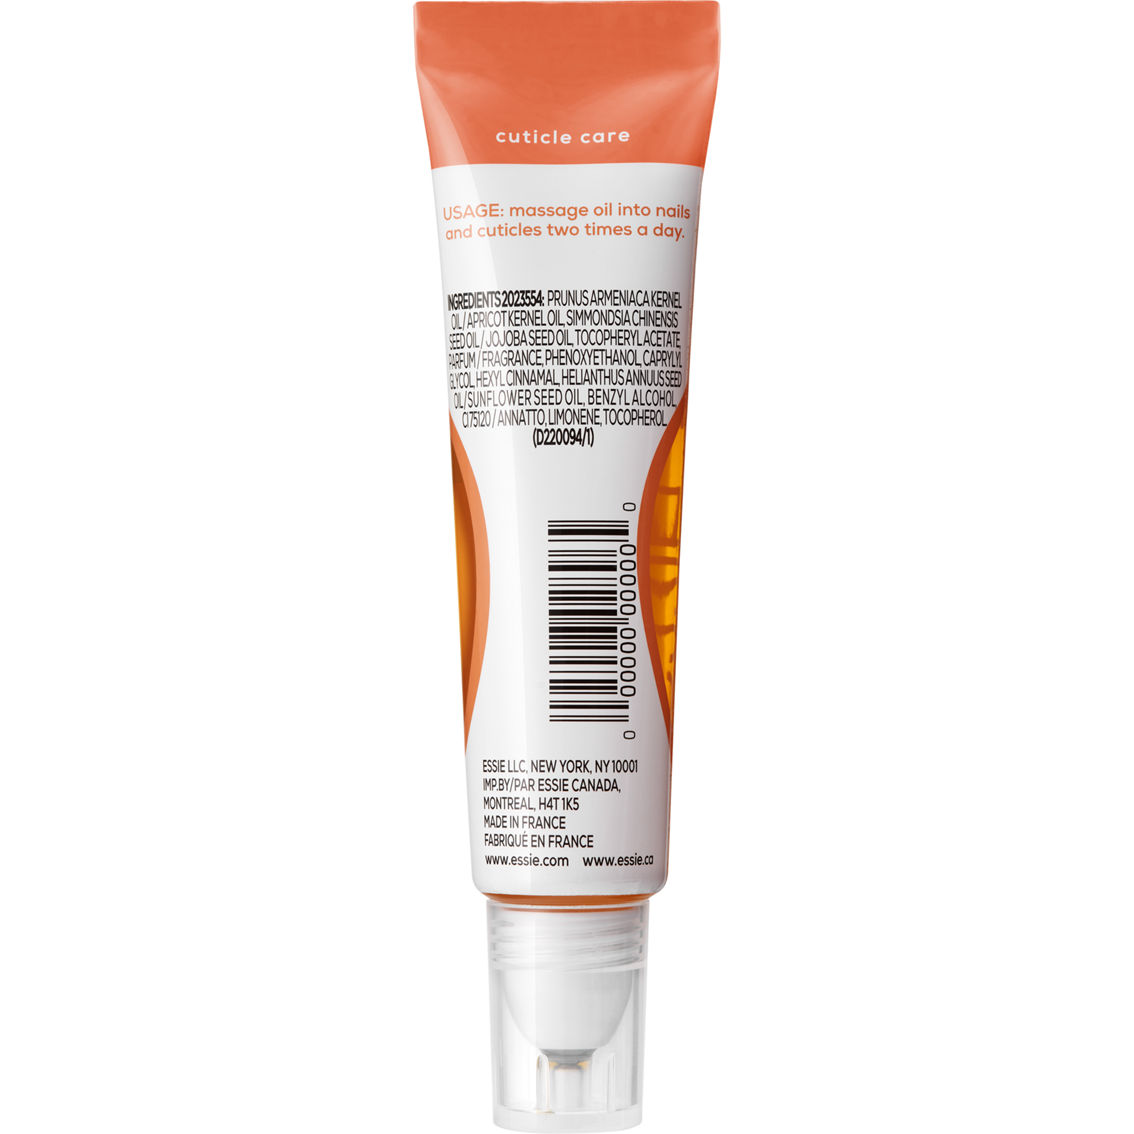 Essie Nail Care On a Roll Apricot Cuticle Oil - Image 2 of 6